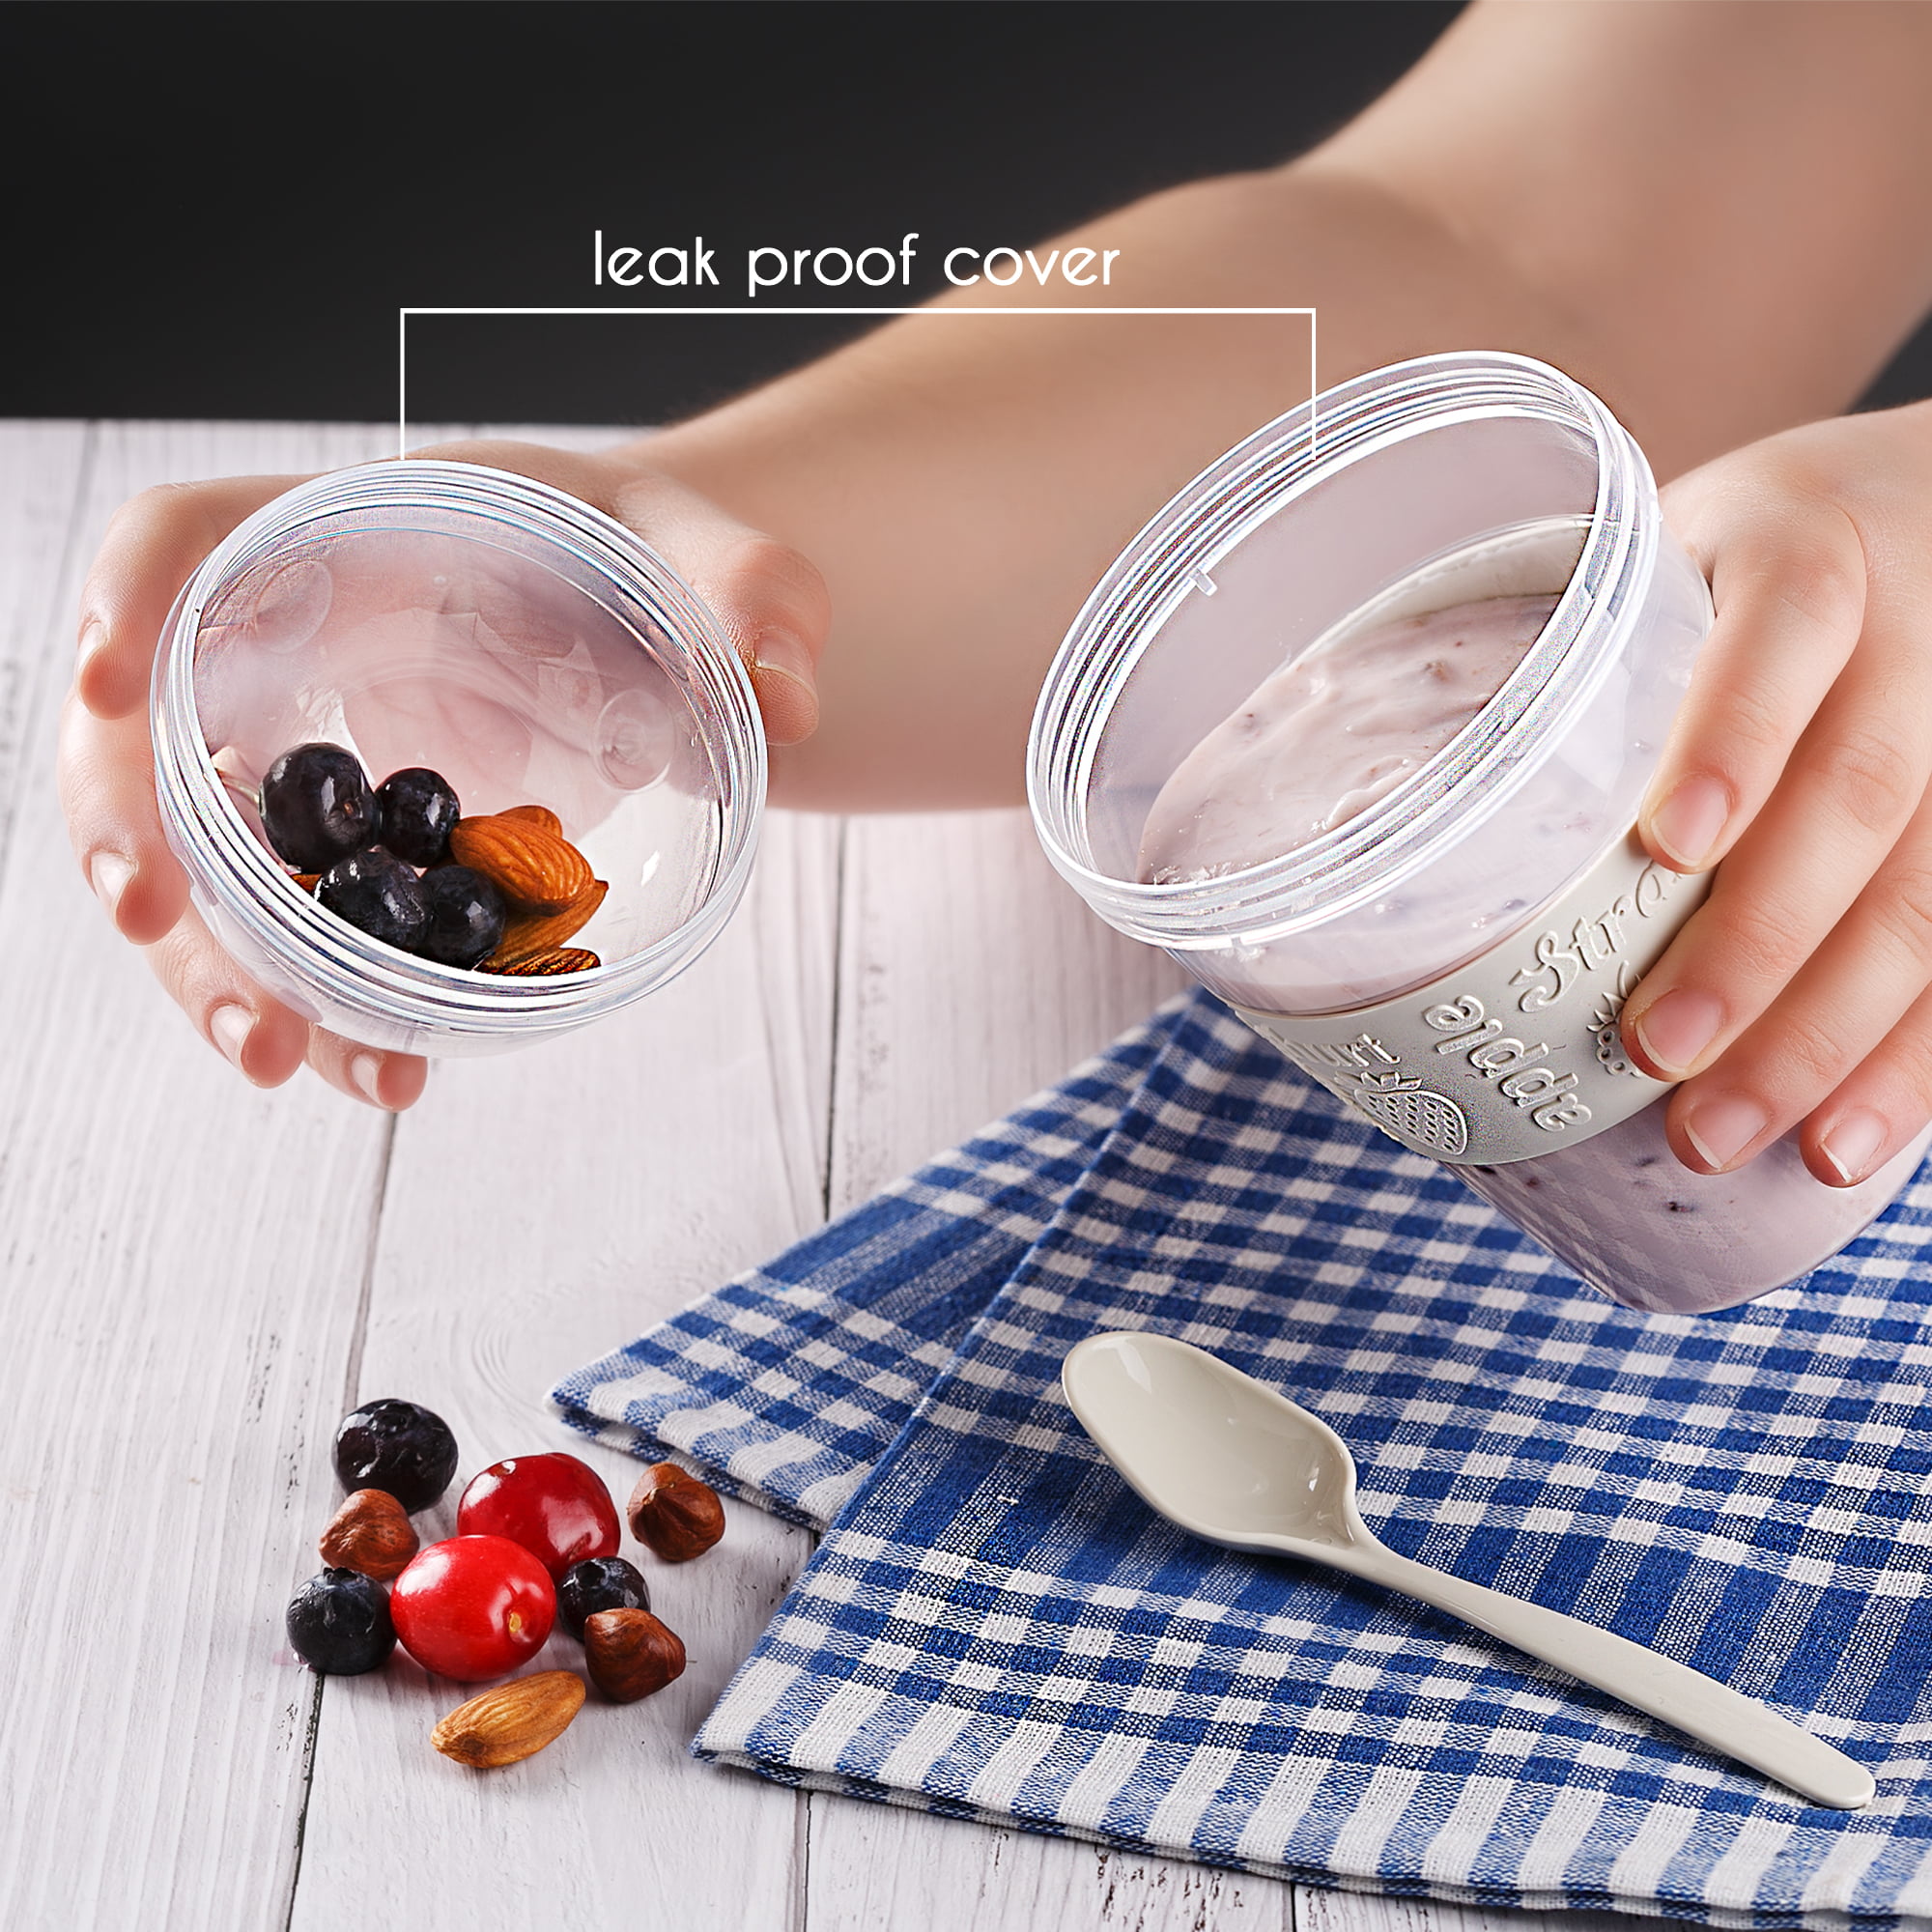 Crystalia Yogurt Parfait Cups with Lids, Mini Breakfast On the Go Plastic  Bowls with Topping Cereal Oatmeal Container with Spoon for Lunch Box